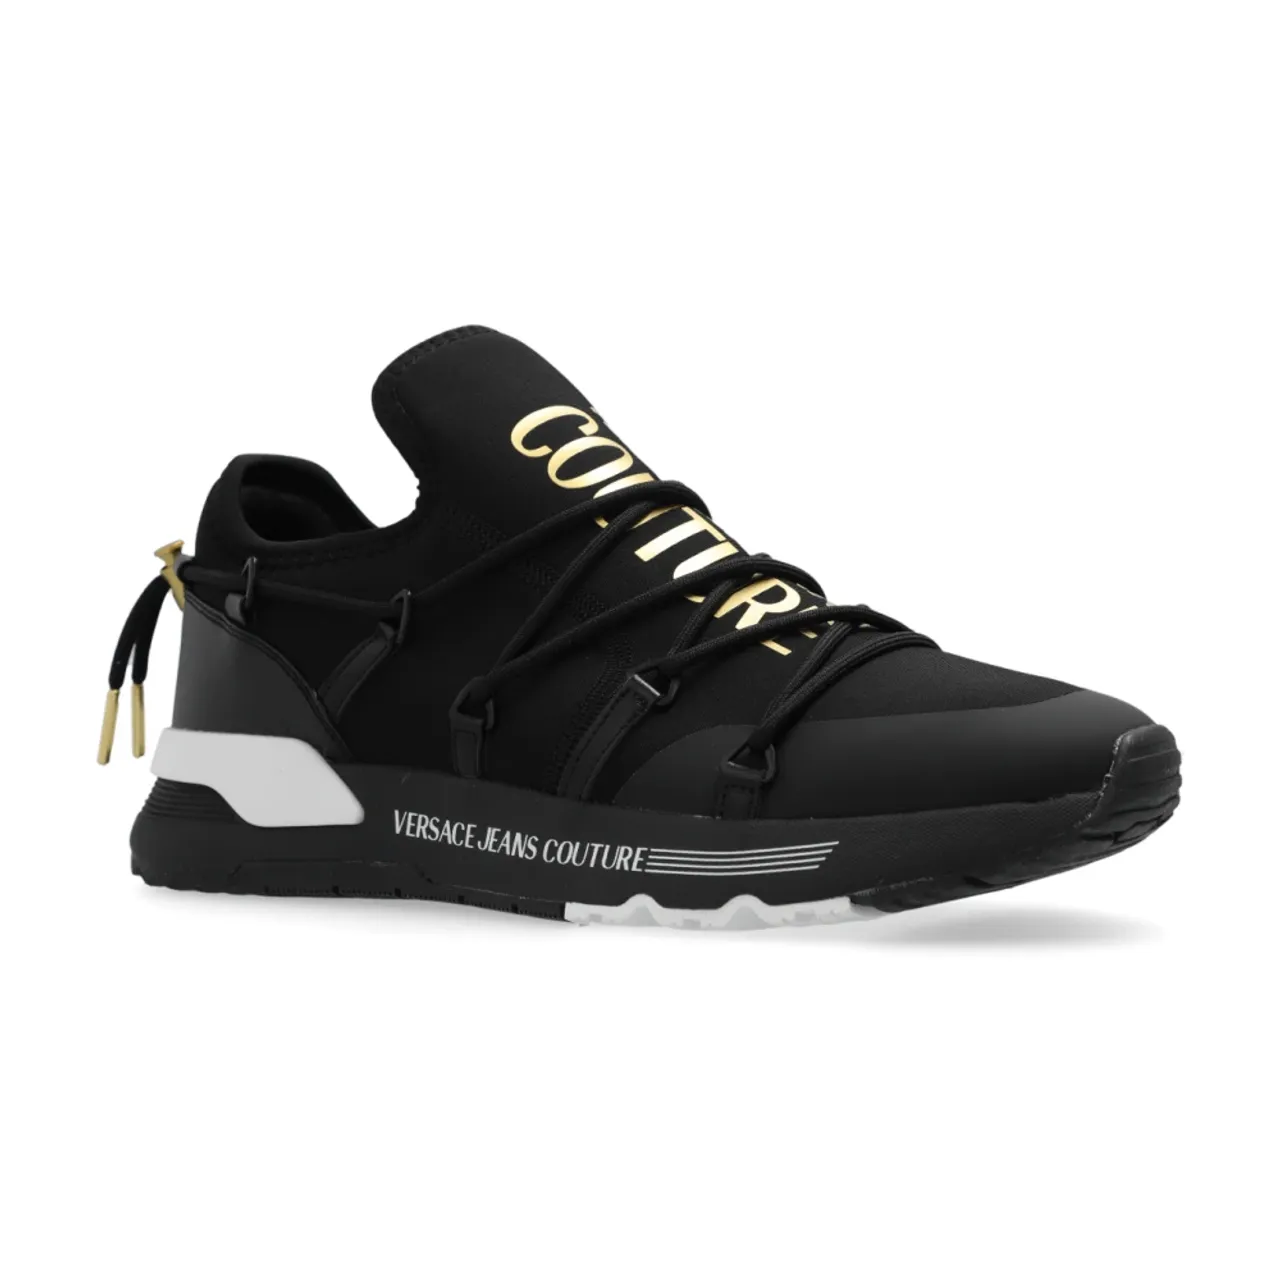 Sneakers mit Logo Versace Jeans Couture